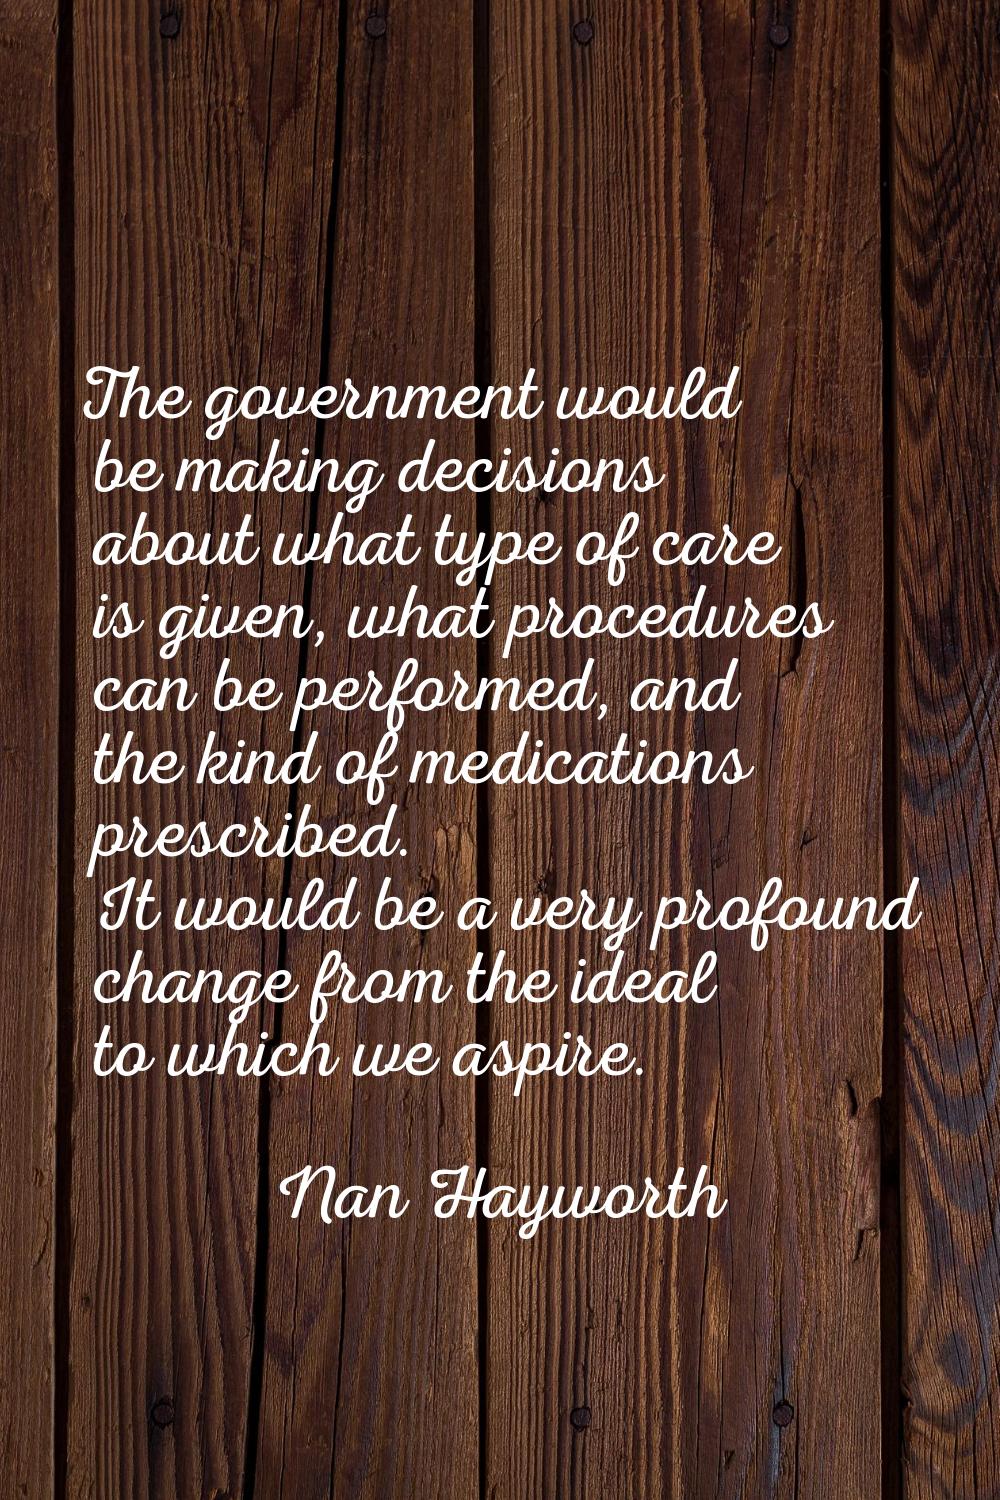 The government would be making decisions about what type of care is given, what procedures can be p